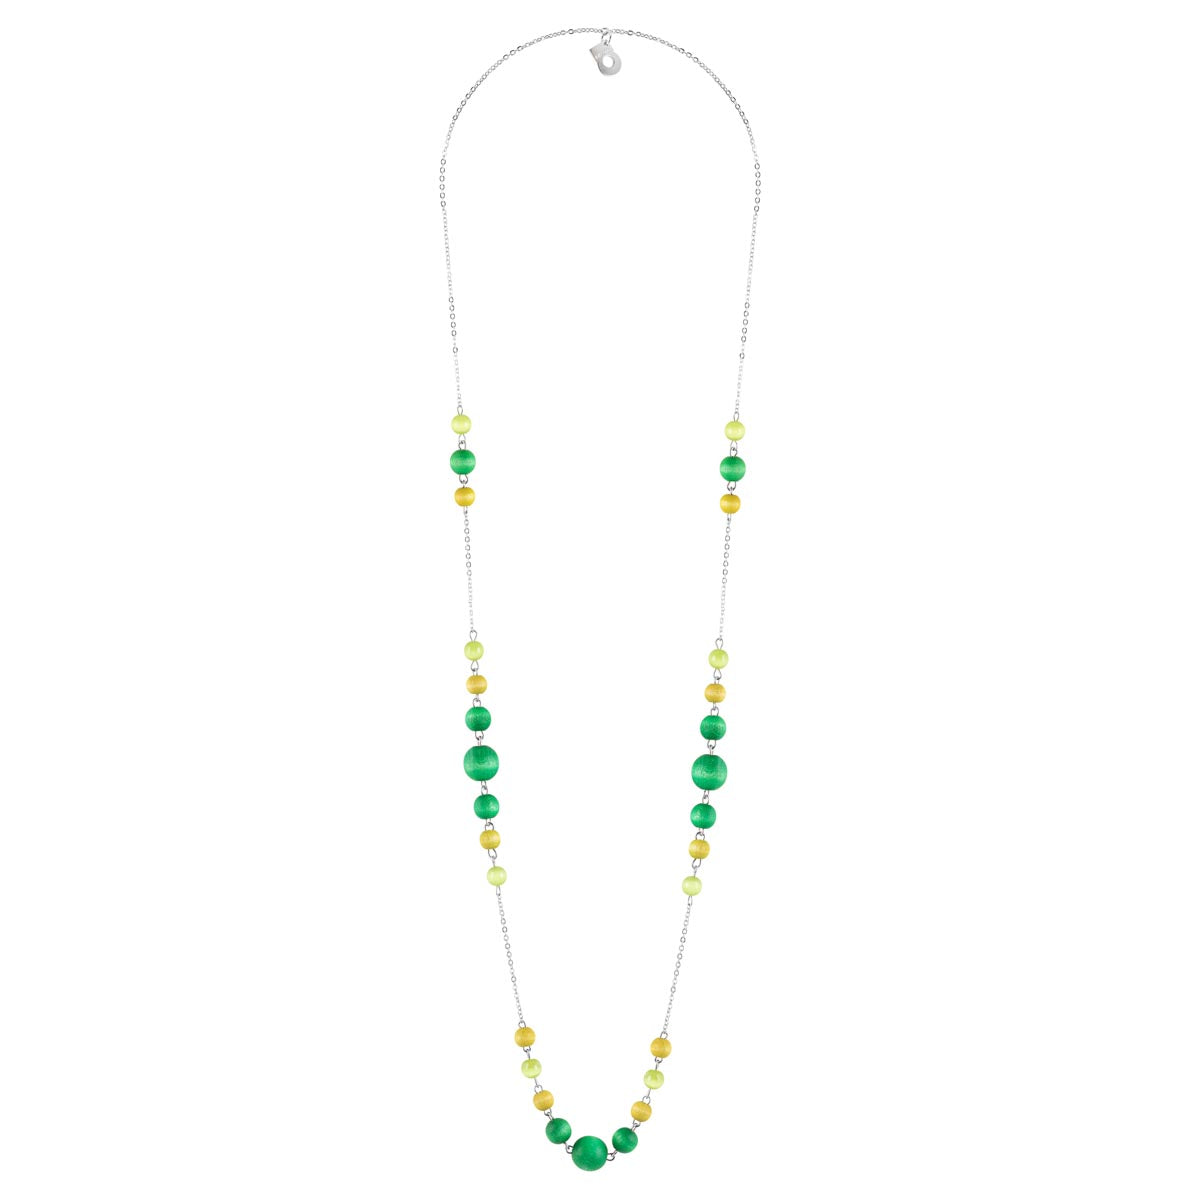 Irene necklace, shades of green